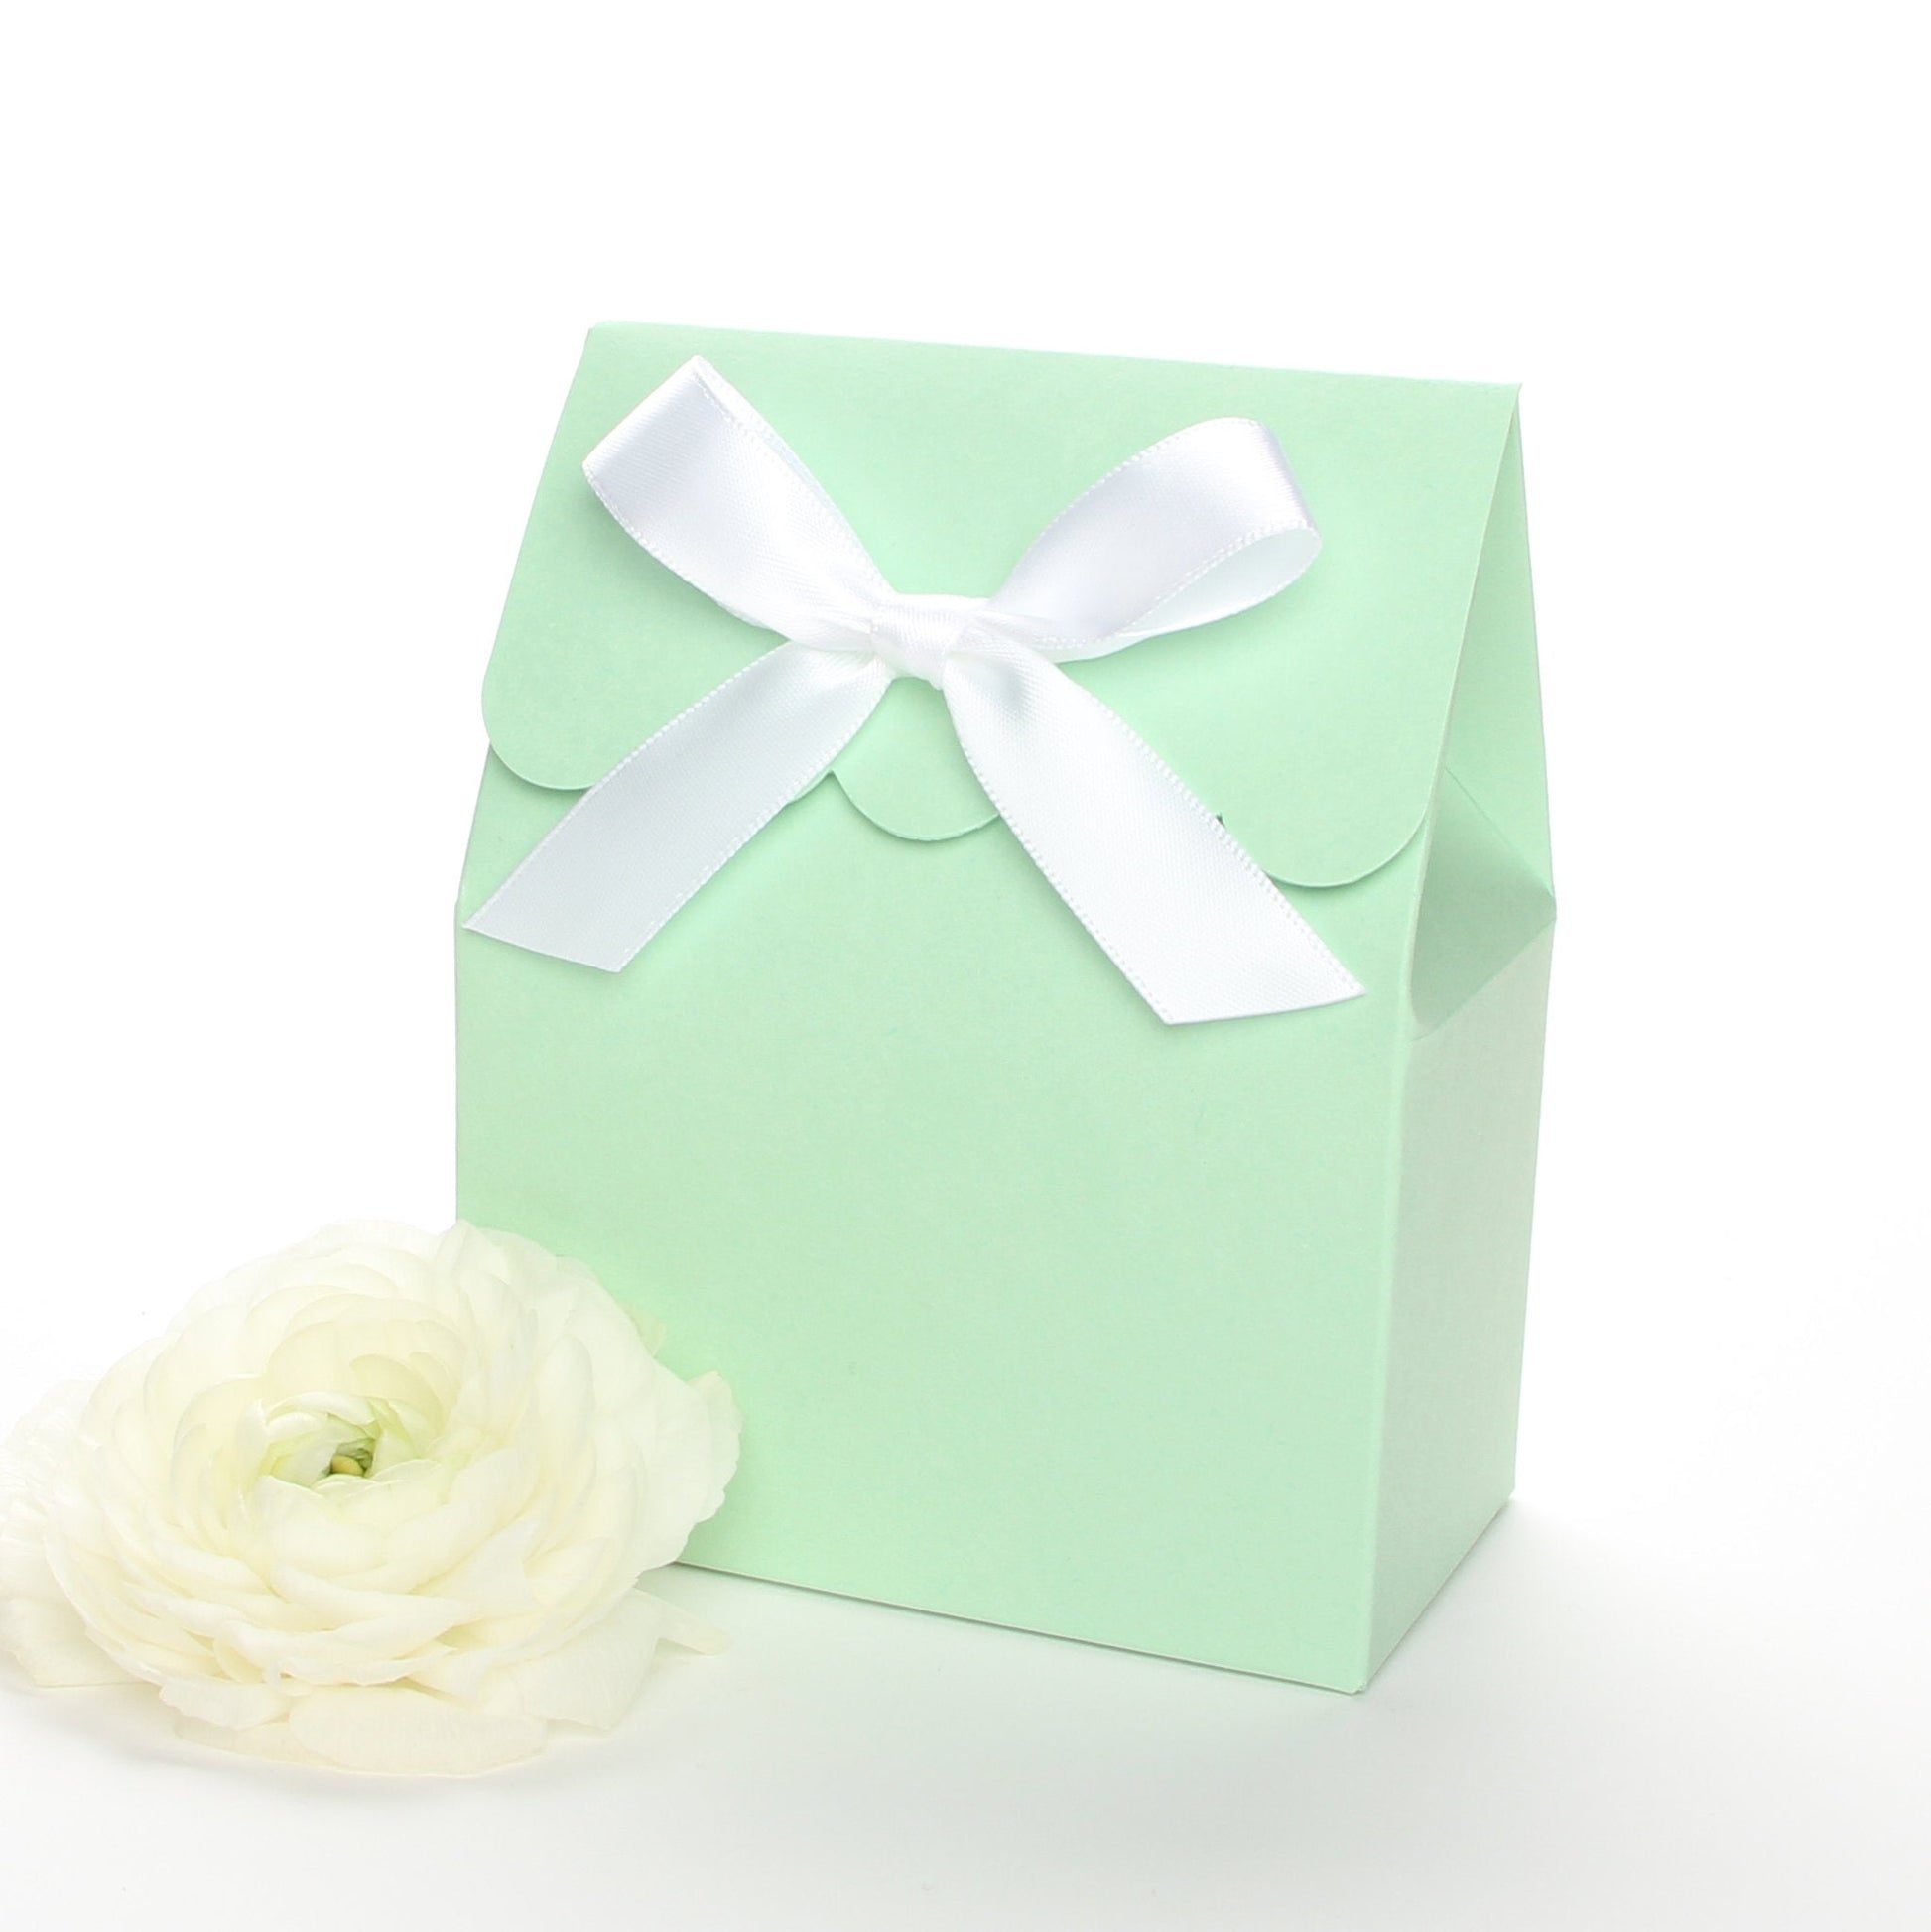 Lux Party’s mint green favor box with a scalloped edge and a white satin bow next to white ranunculus flowers.